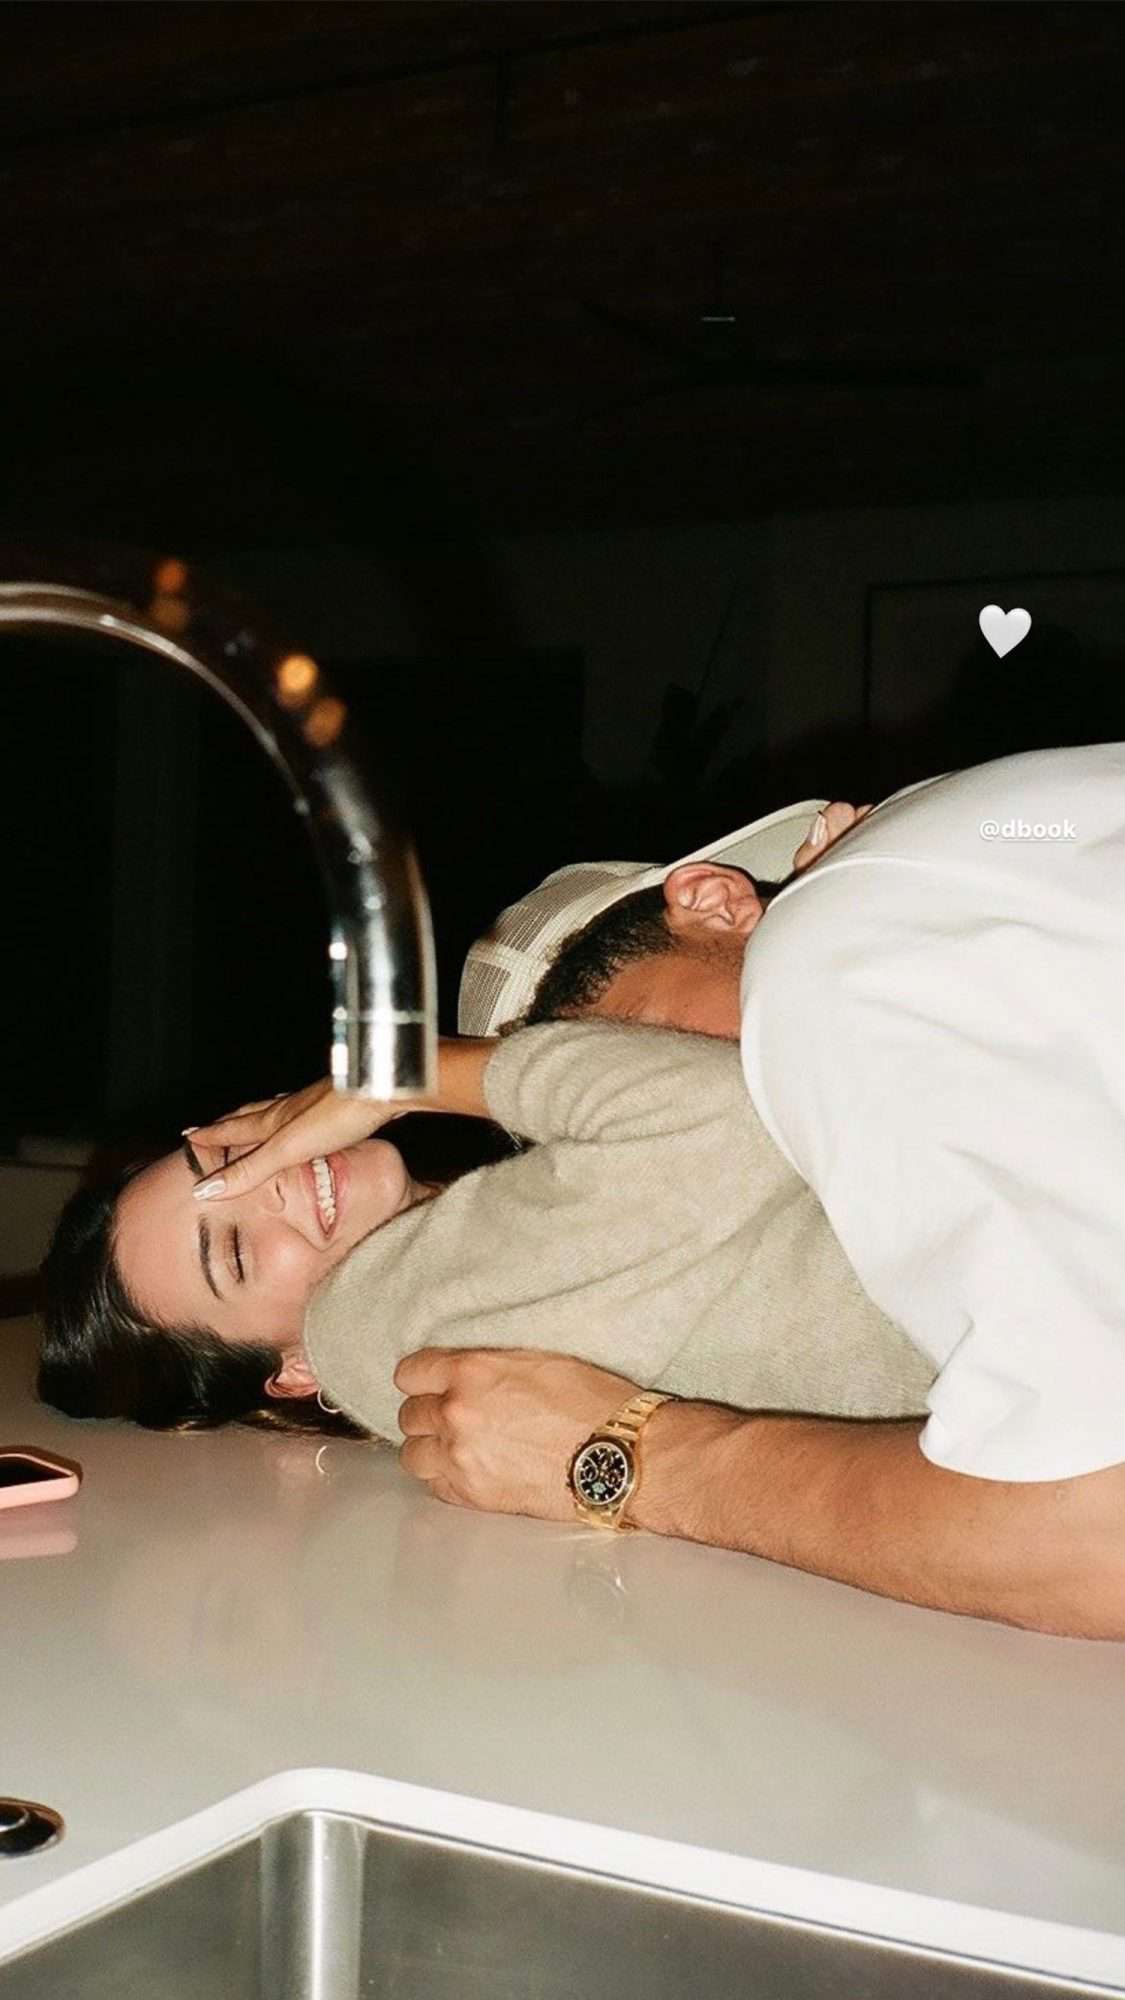 Kendall Jenner and Devin Booker Share First Photo Together on Valentine's Day